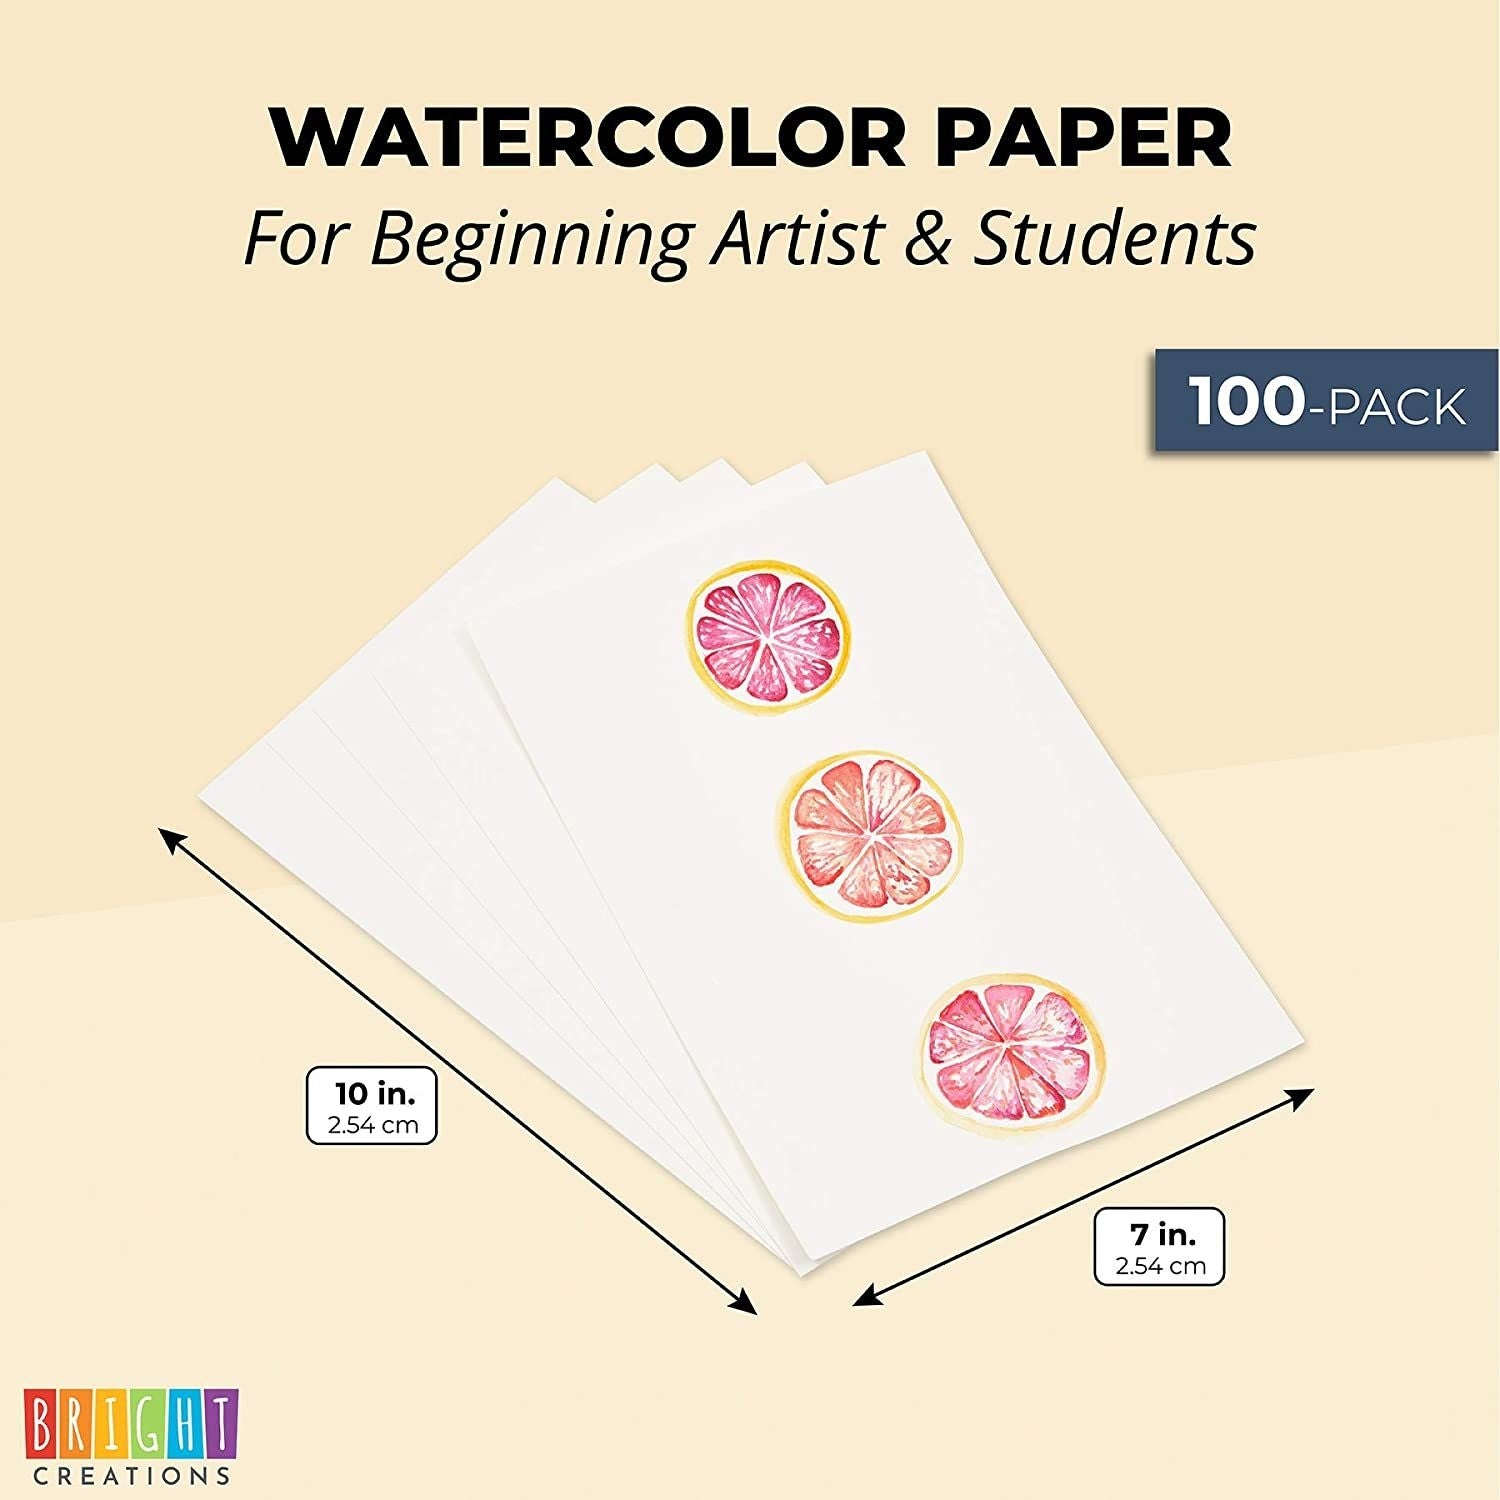 Bright Creations 100 Sheets Cold Press Watercolor Paper - Bulk Cotton Watercolor Paper for Novice and Advanced Artists (7x10 in)